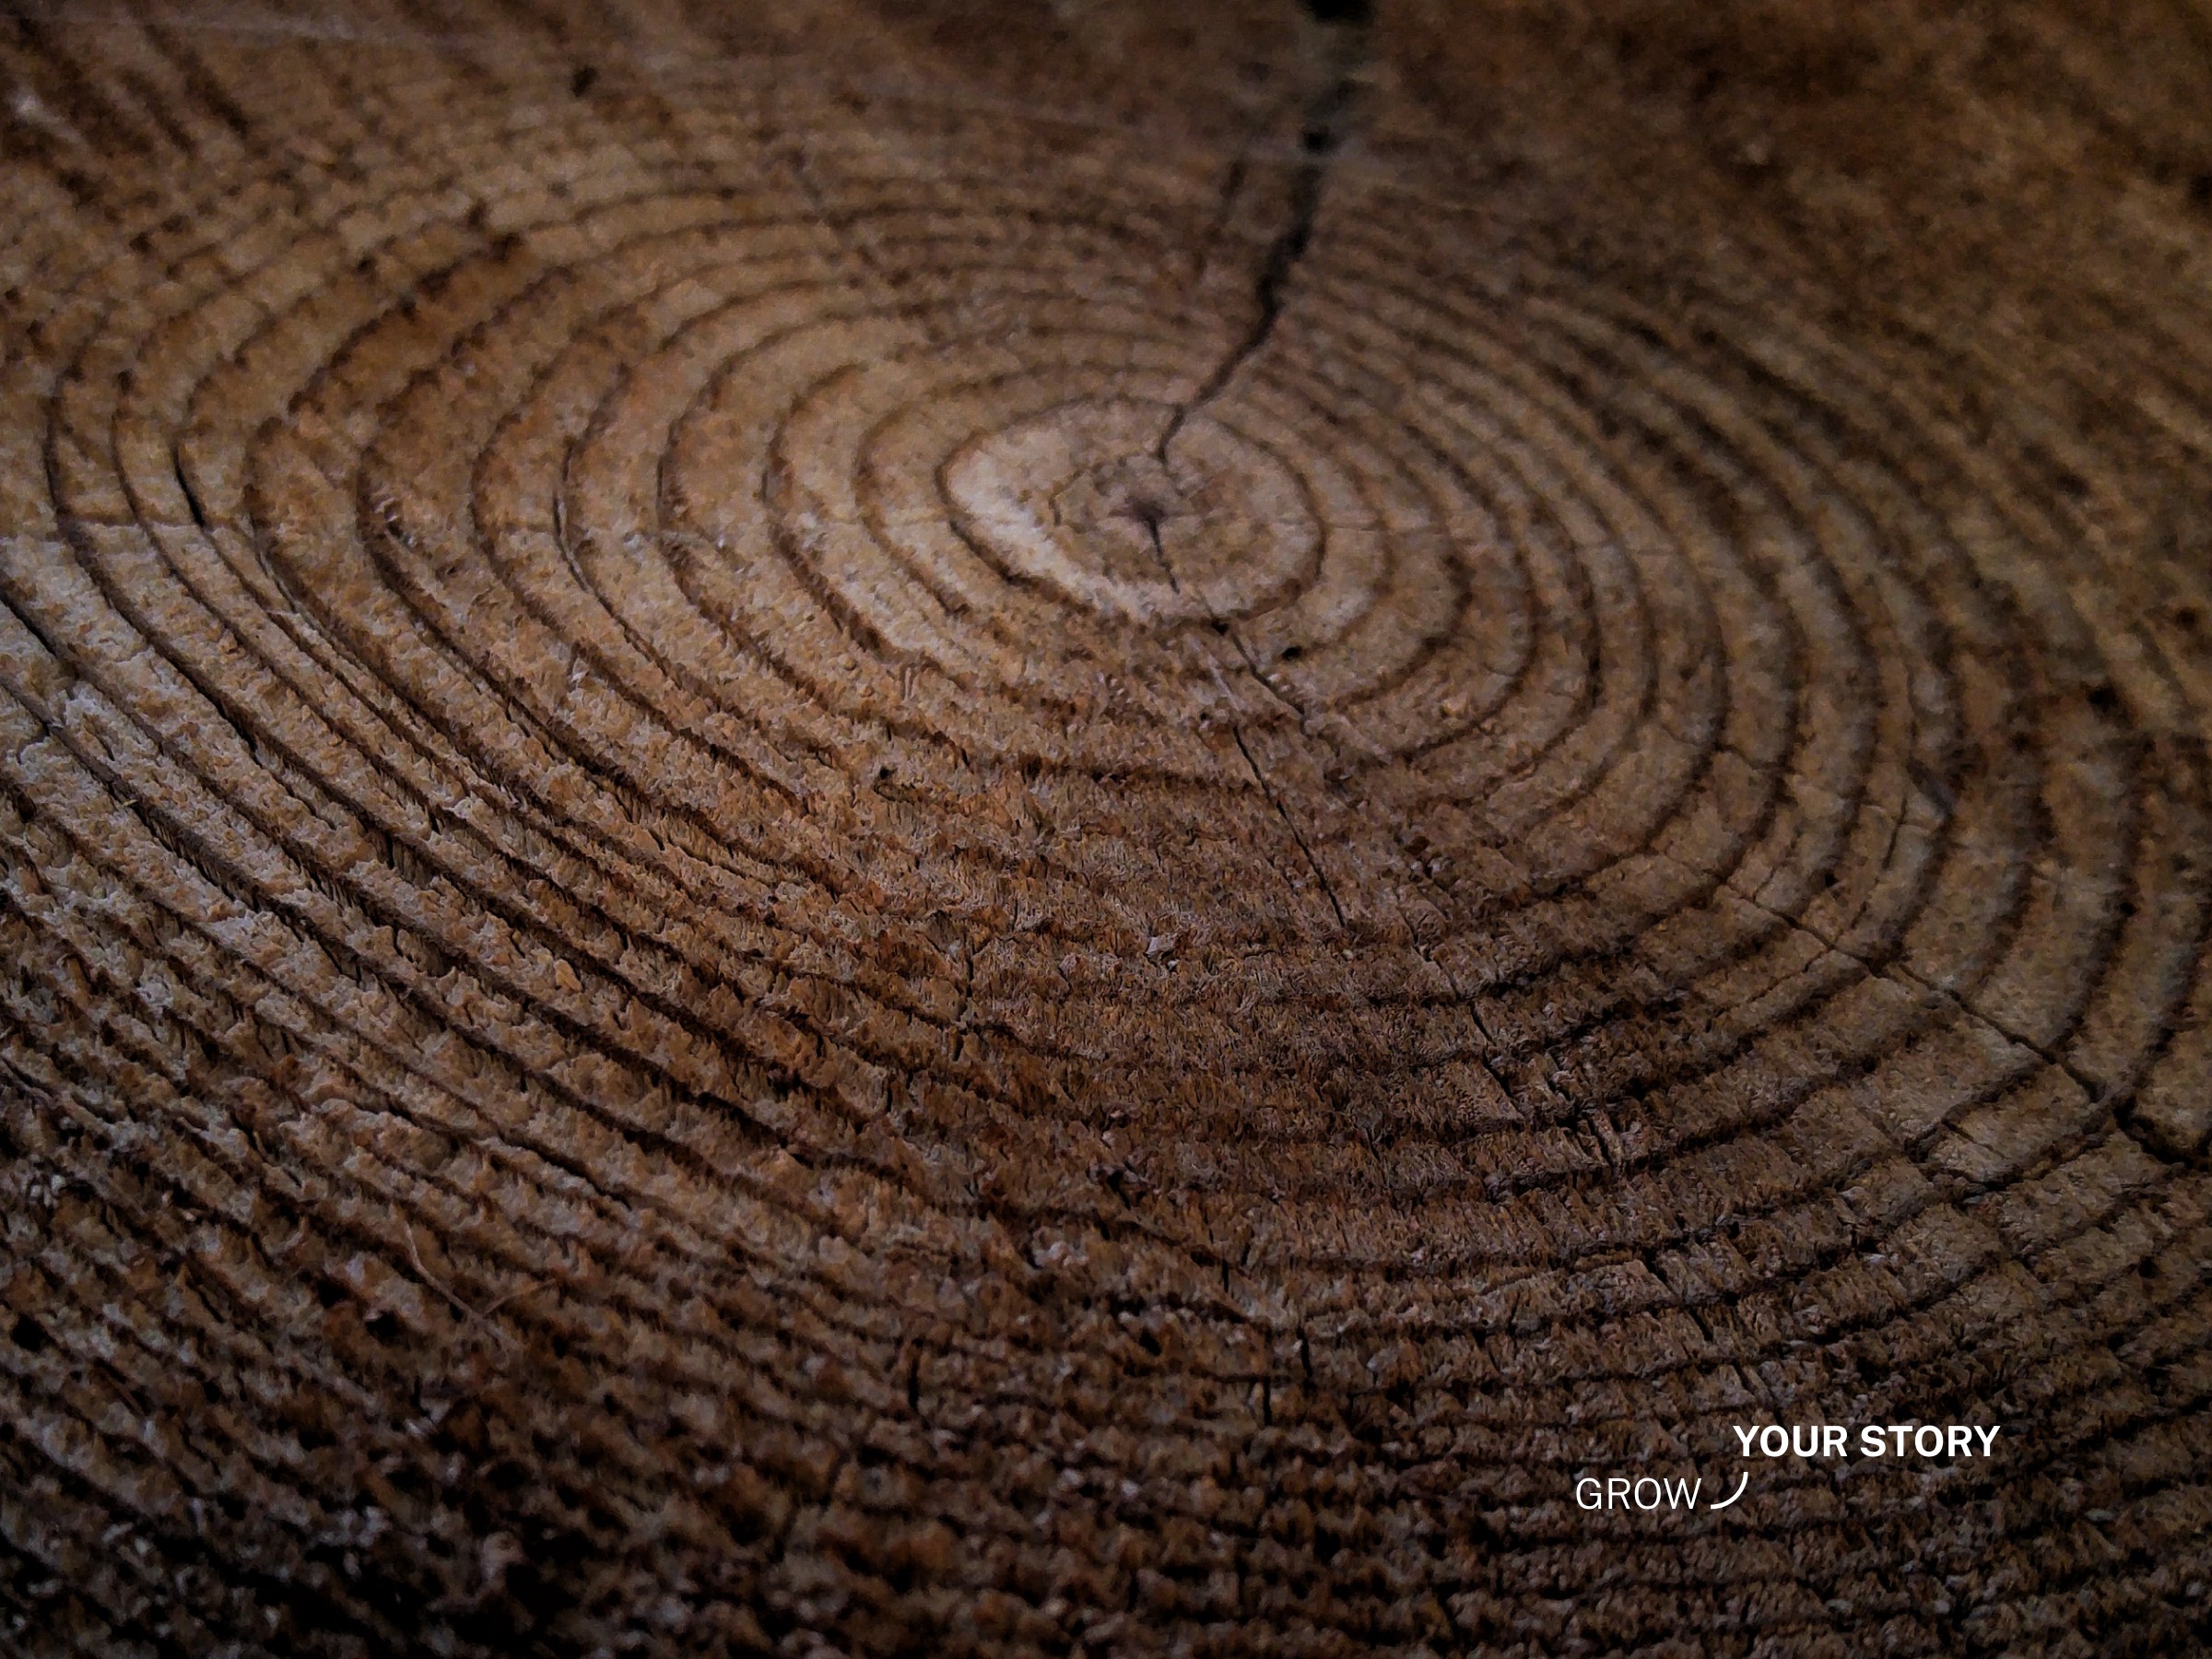 Many concentric tree rings with Grow Your Story watermark